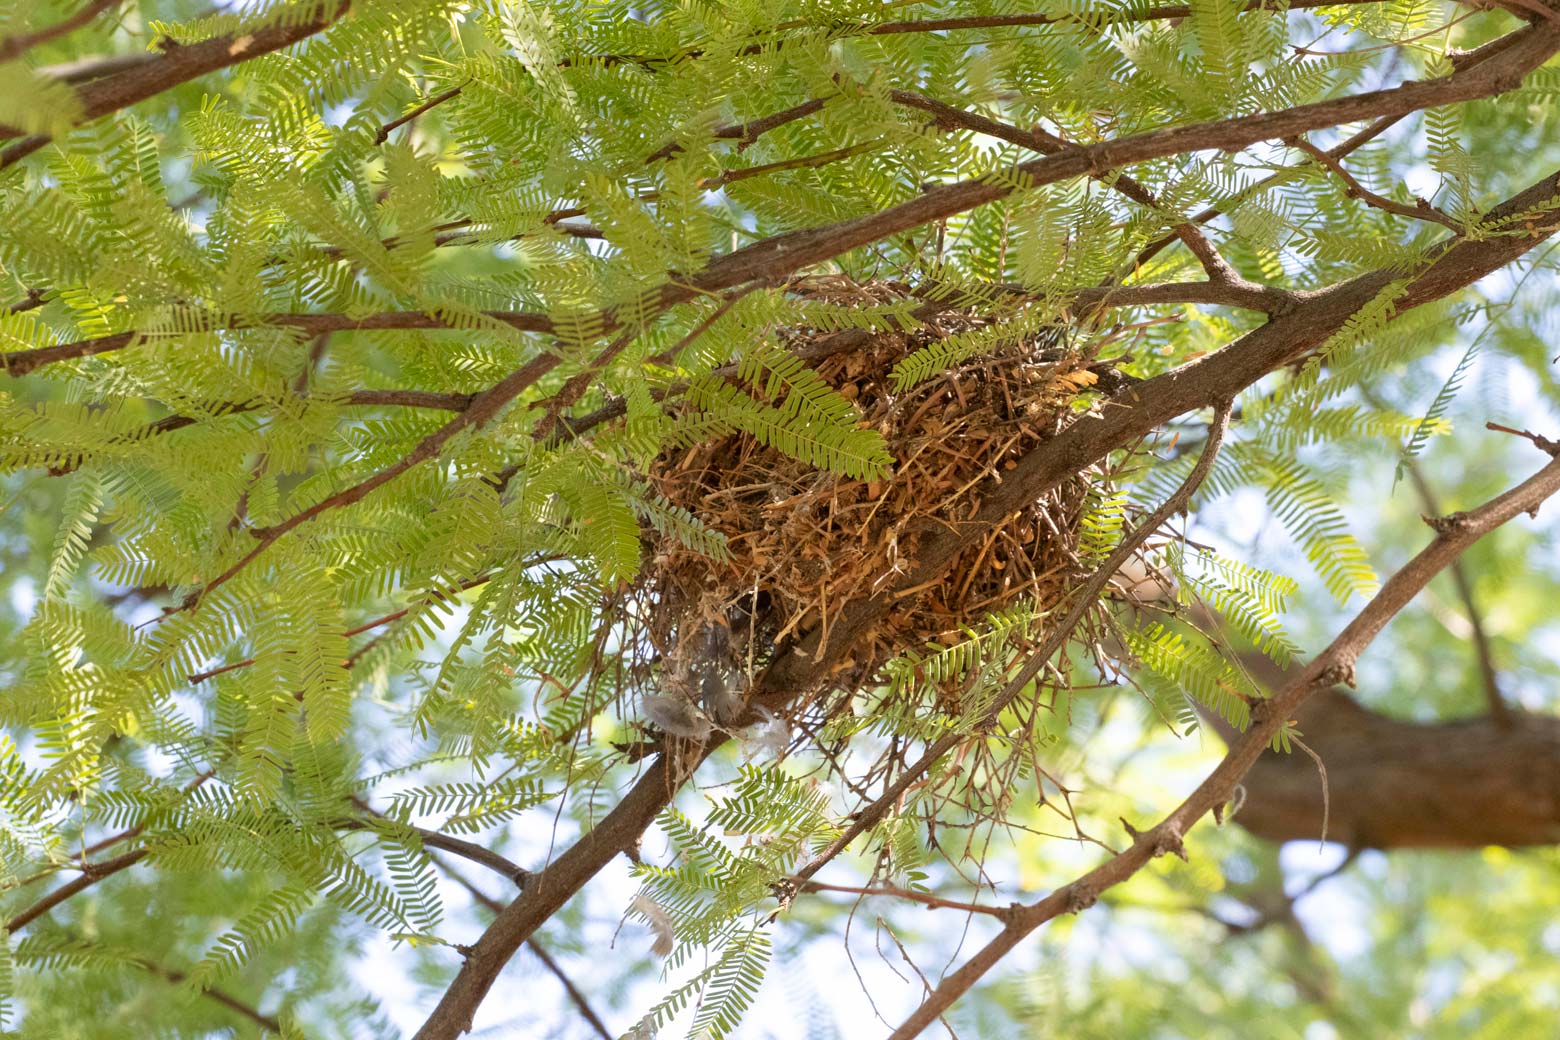 A bird's nest in a Mesquite tree.